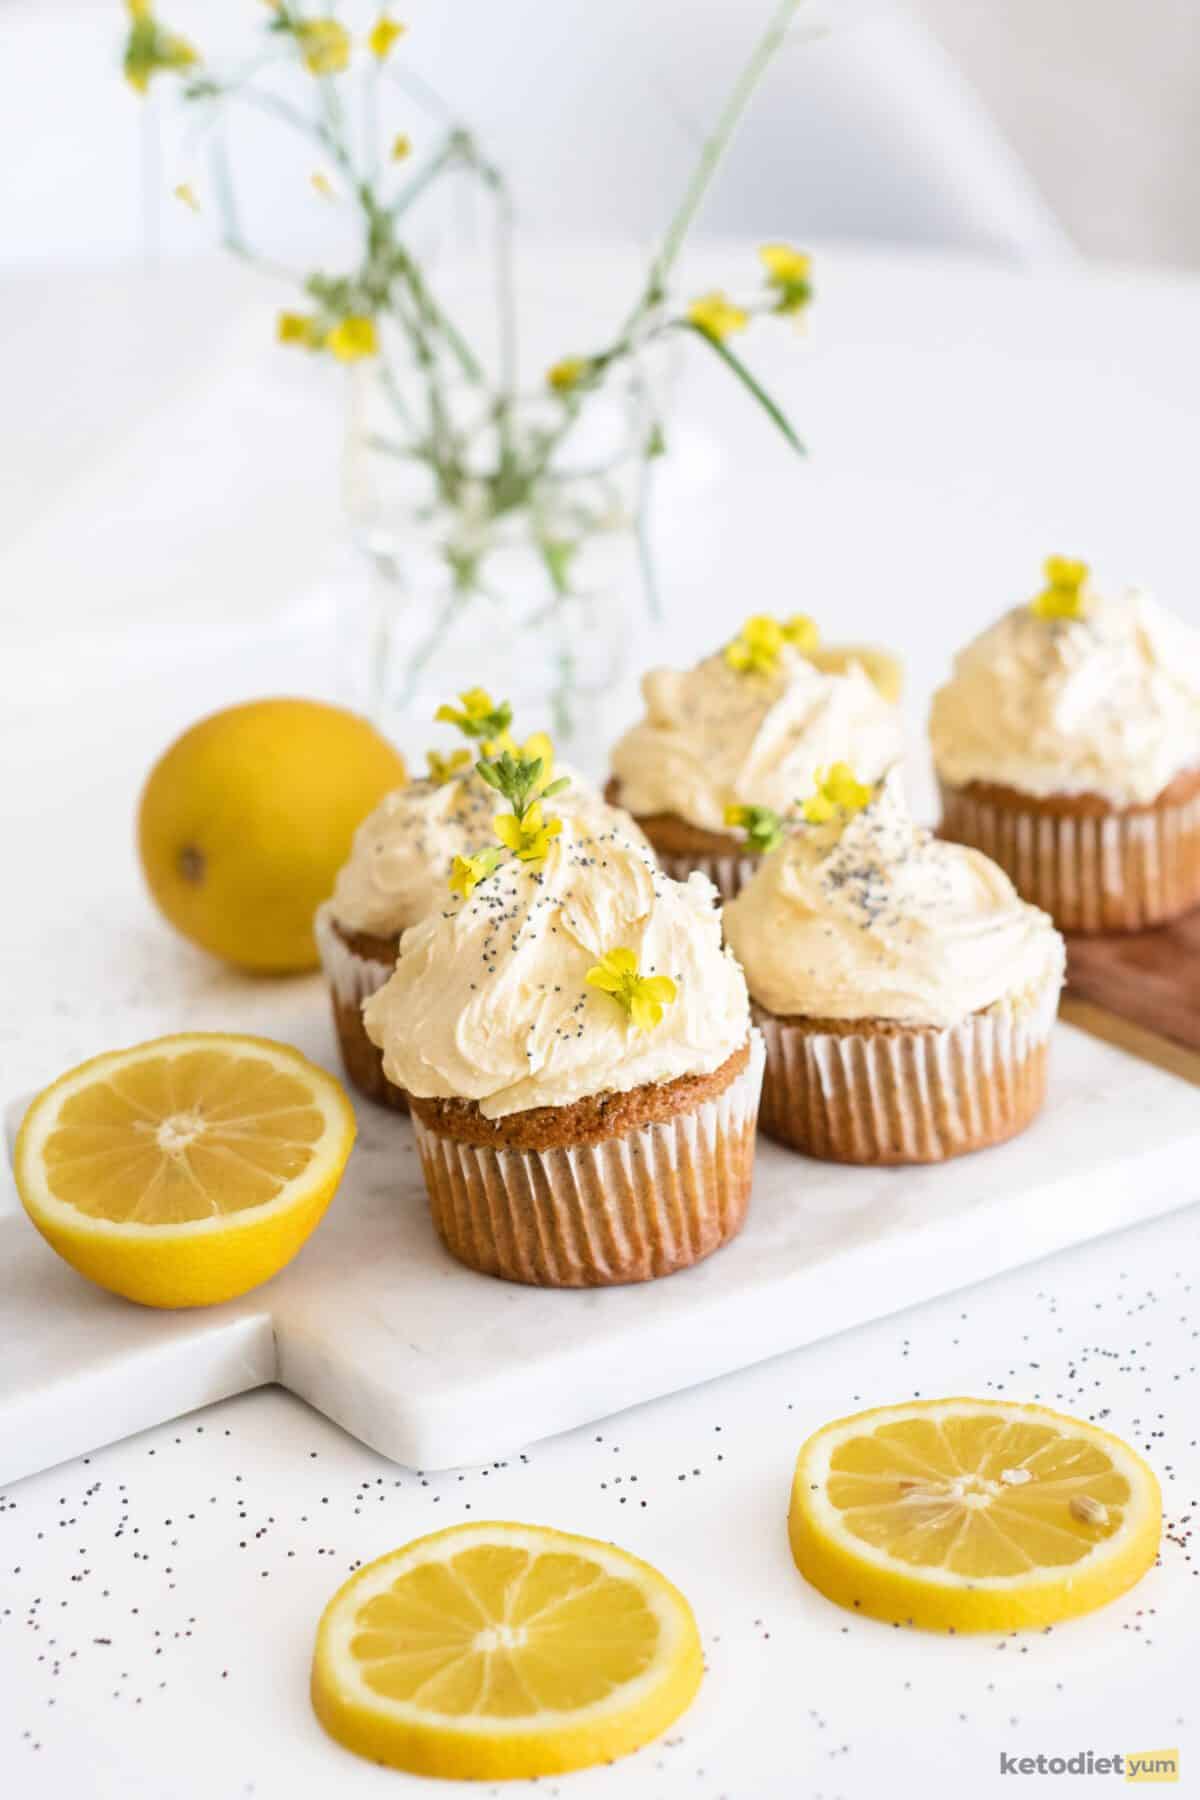 lemon poppy seed cupcakes - cupcakes frosted with lemon keto buttercream frosting